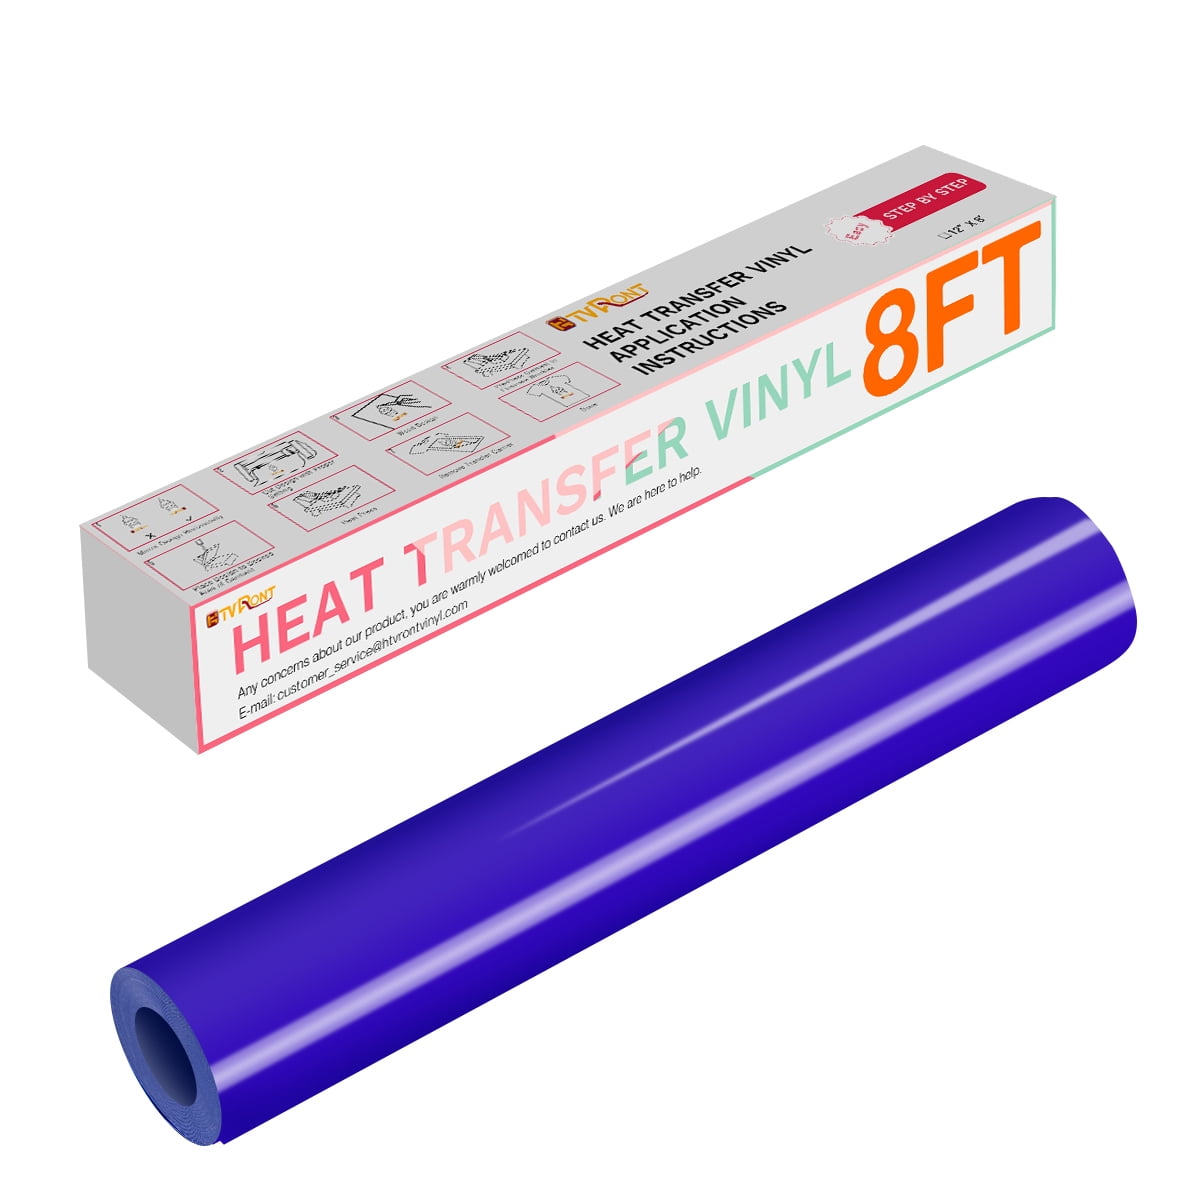 HTVRONT 12 x 5FT Heat Transfer Vinyl Navy Blue HTV Rolls for T-Shirts,  Clothing and Textiles, Easy Transfers